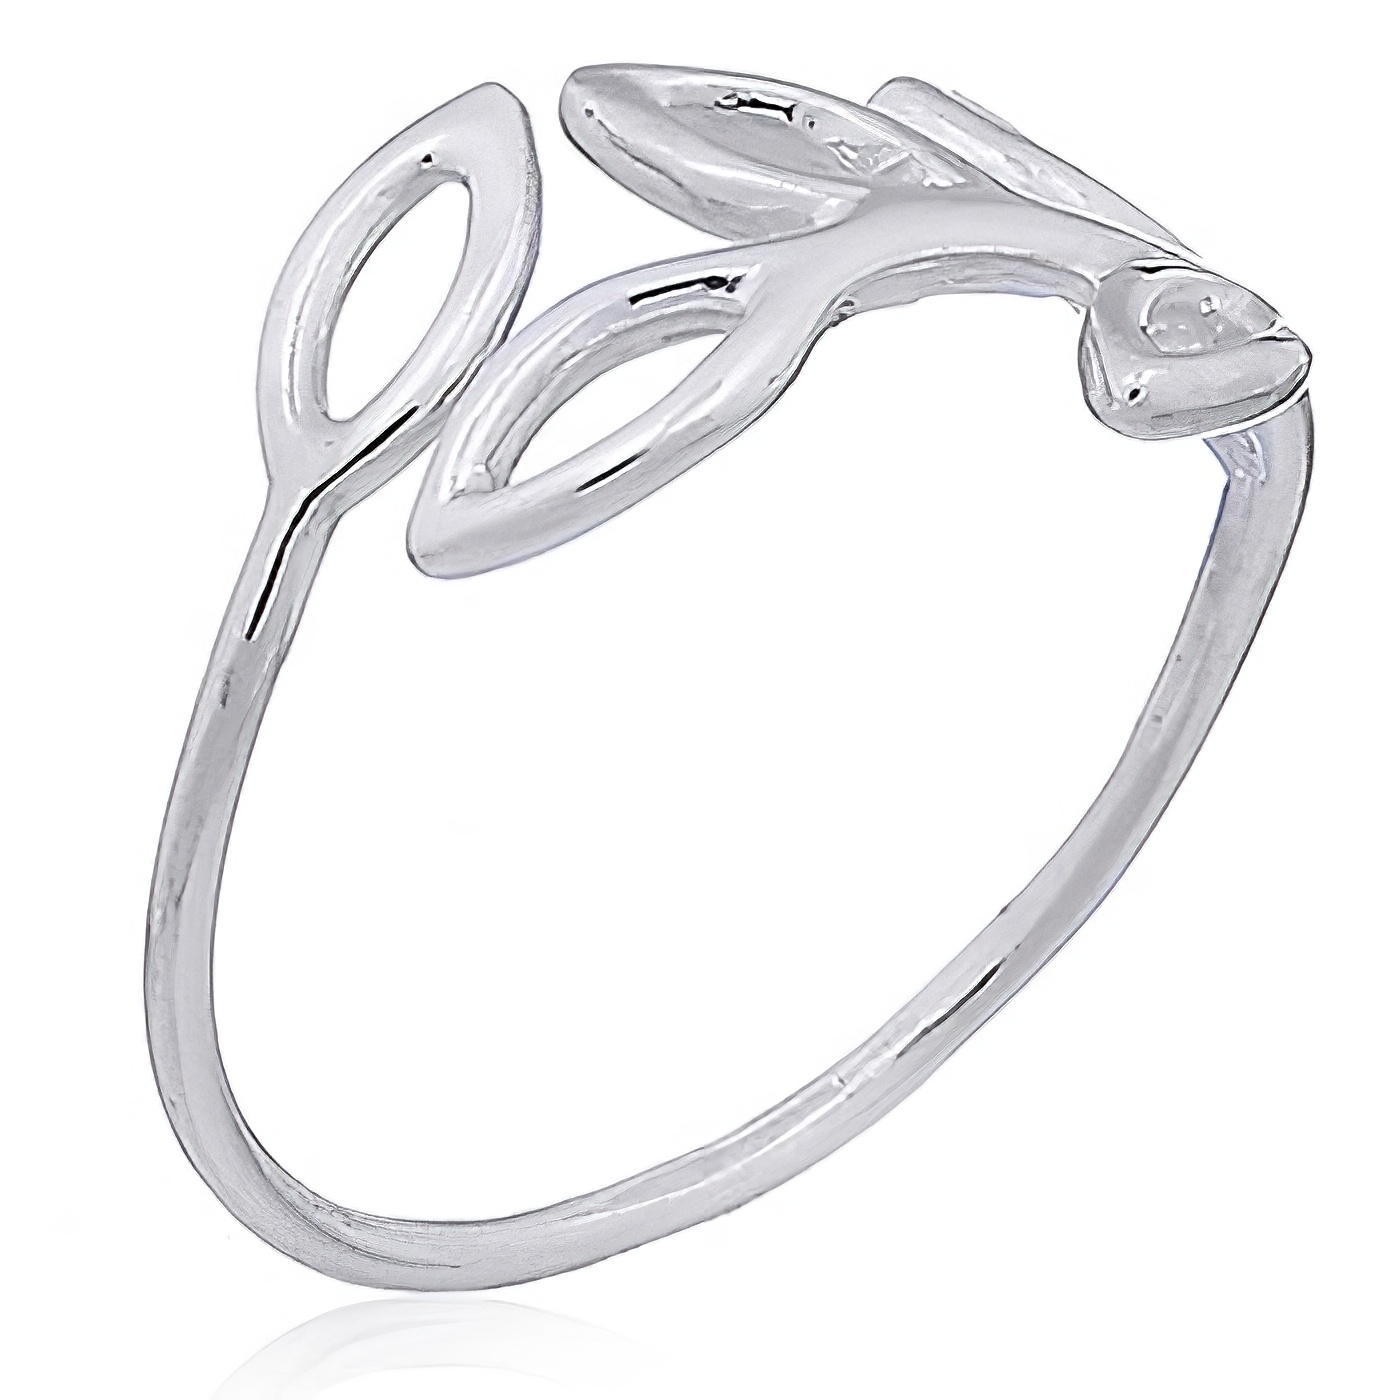 Elemental Branch Silver Ring with Open Leaves by BeYindi 